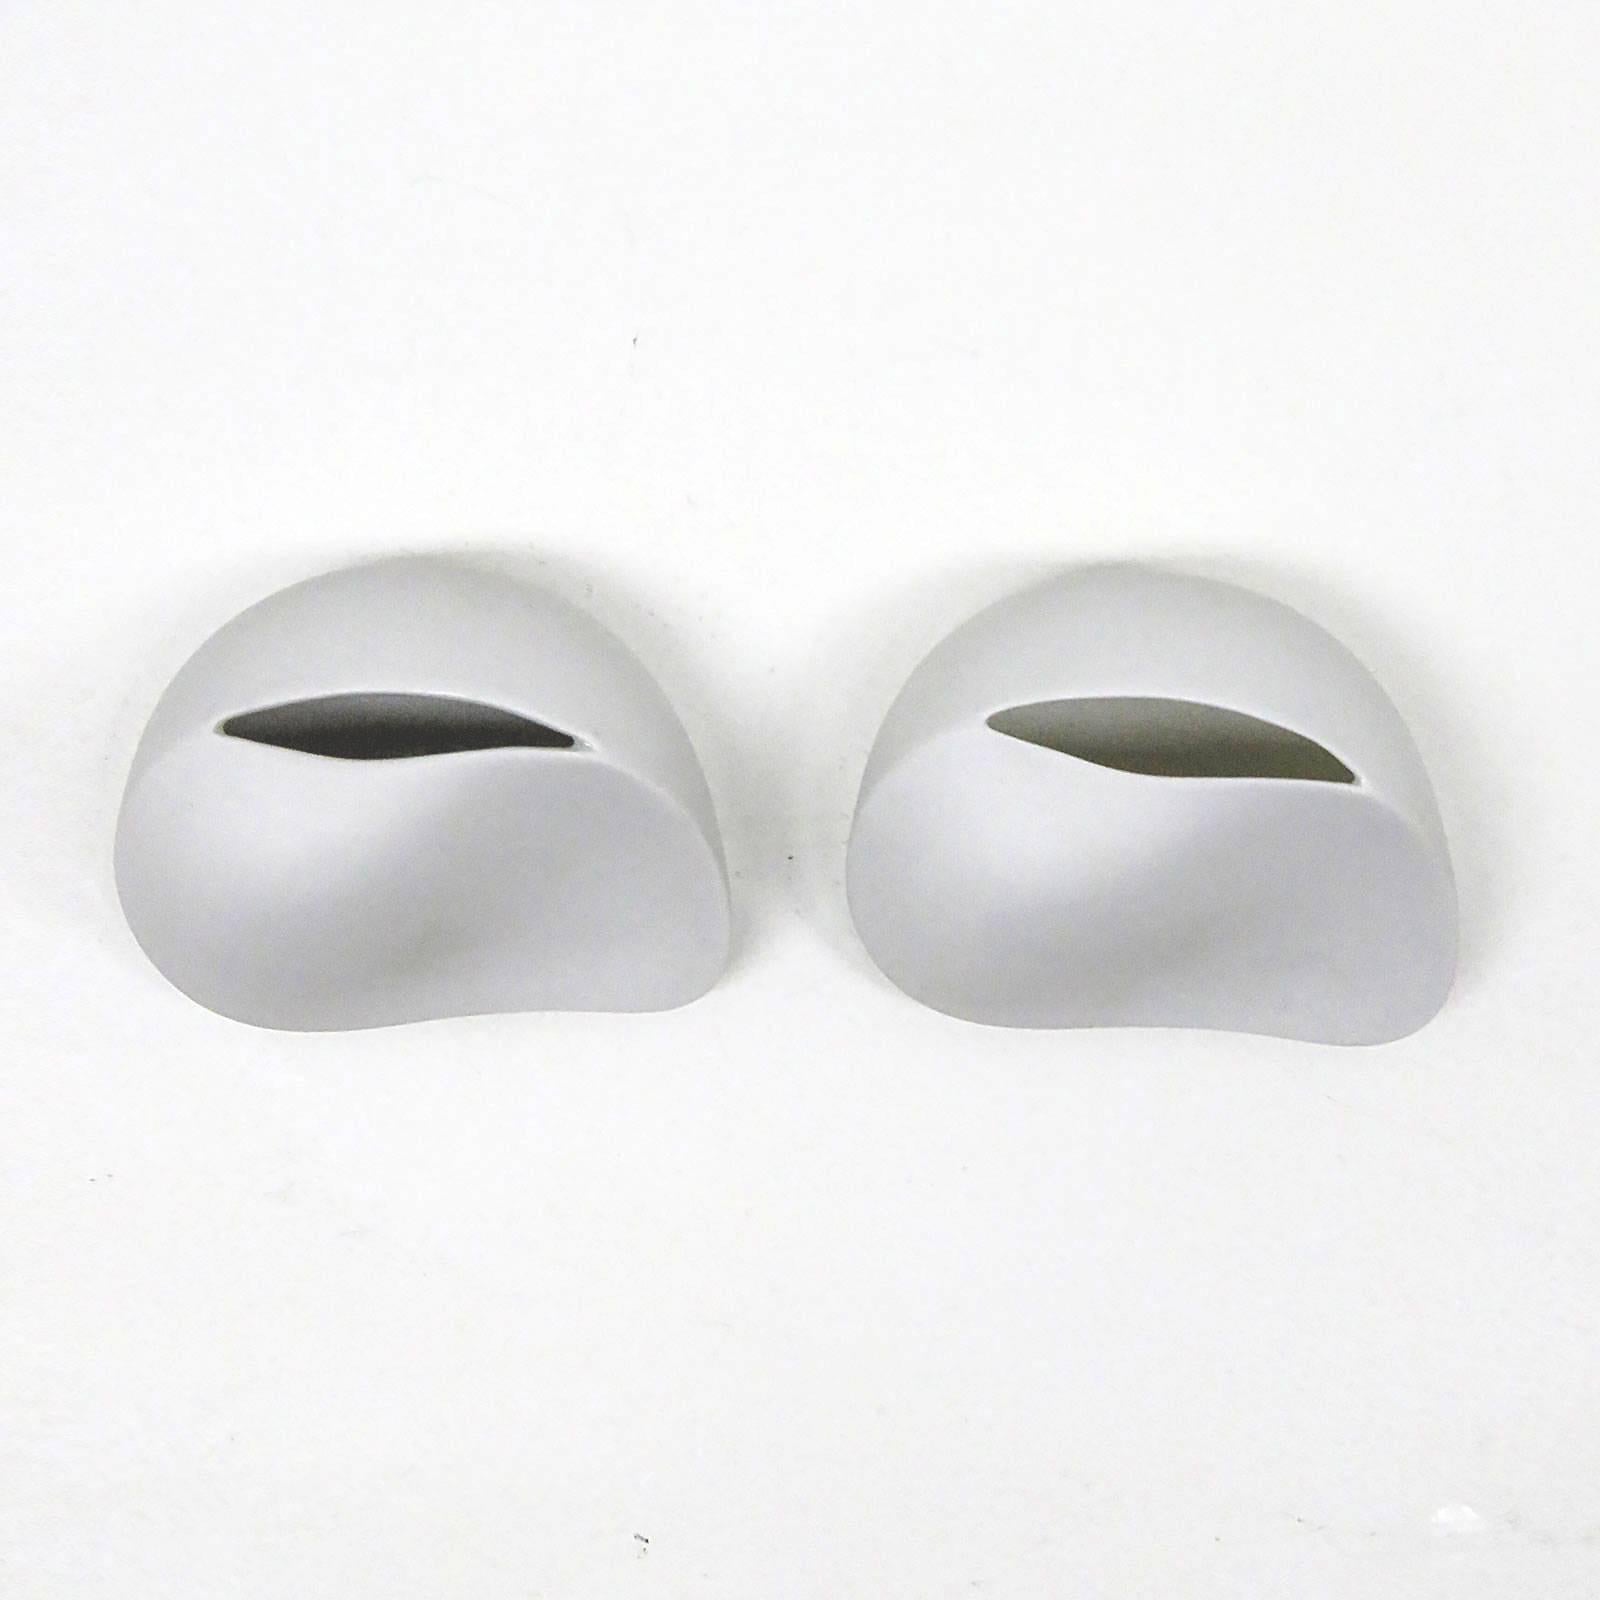 Pair of Uta Feyl Porcelain Vases for Rosenthal In Excellent Condition For Sale In Los Angeles, CA